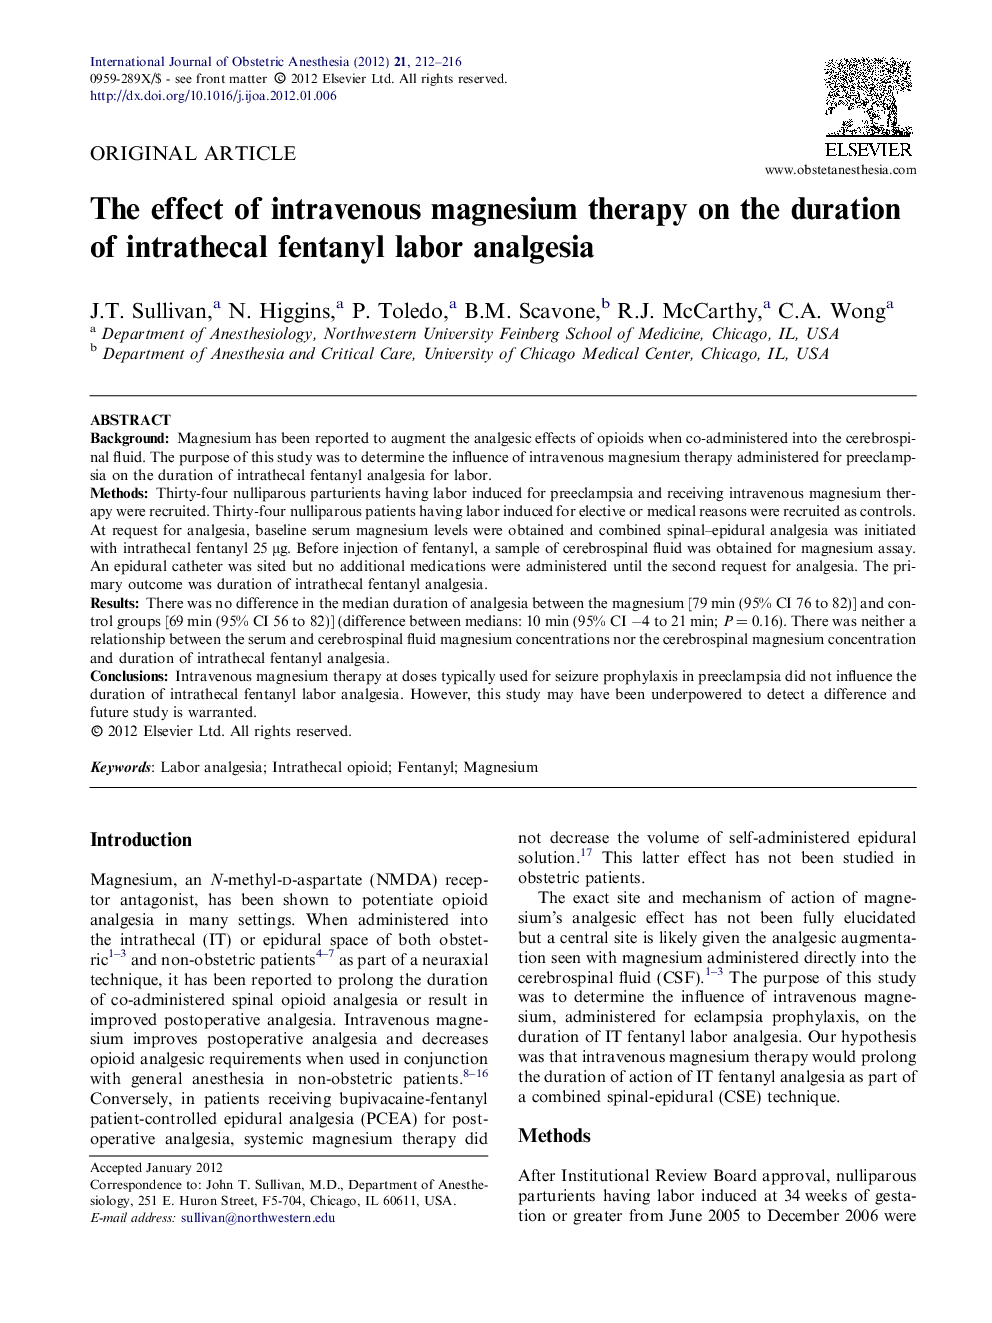 The effect of intravenous magnesium therapy on the duration of intrathecal fentanyl labor analgesia